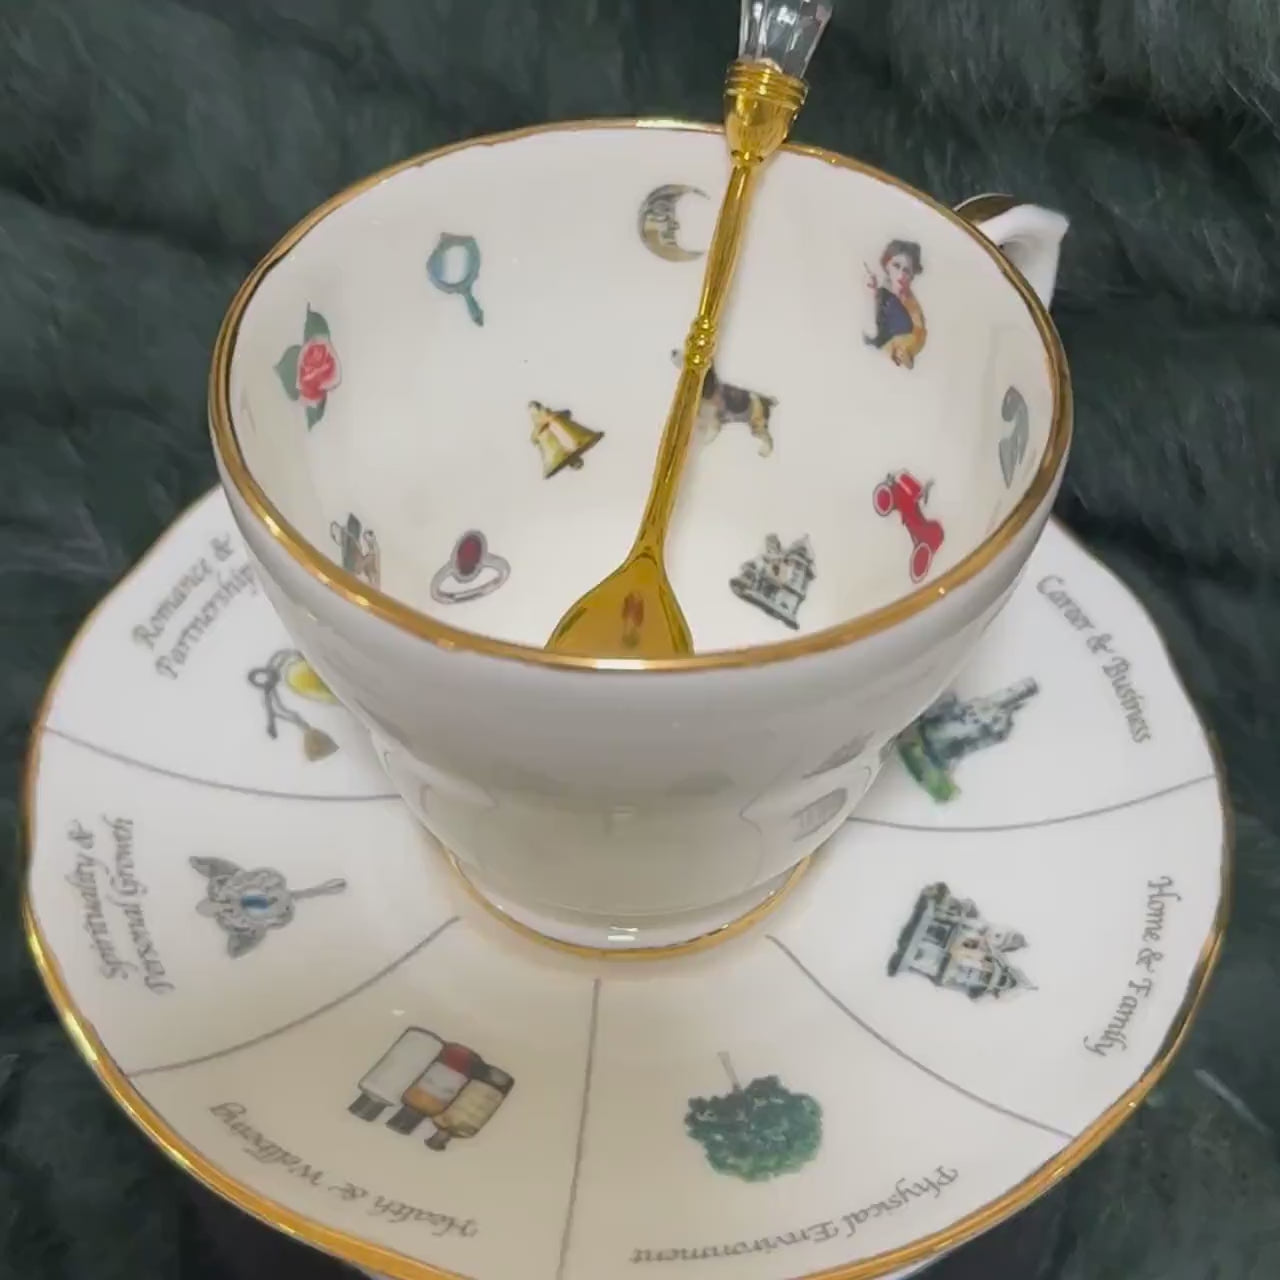 Classic White Gold Tea cup and saucer set. Teacup and Saucer Set. FREE online video course learn to read fortune teller tea cups.